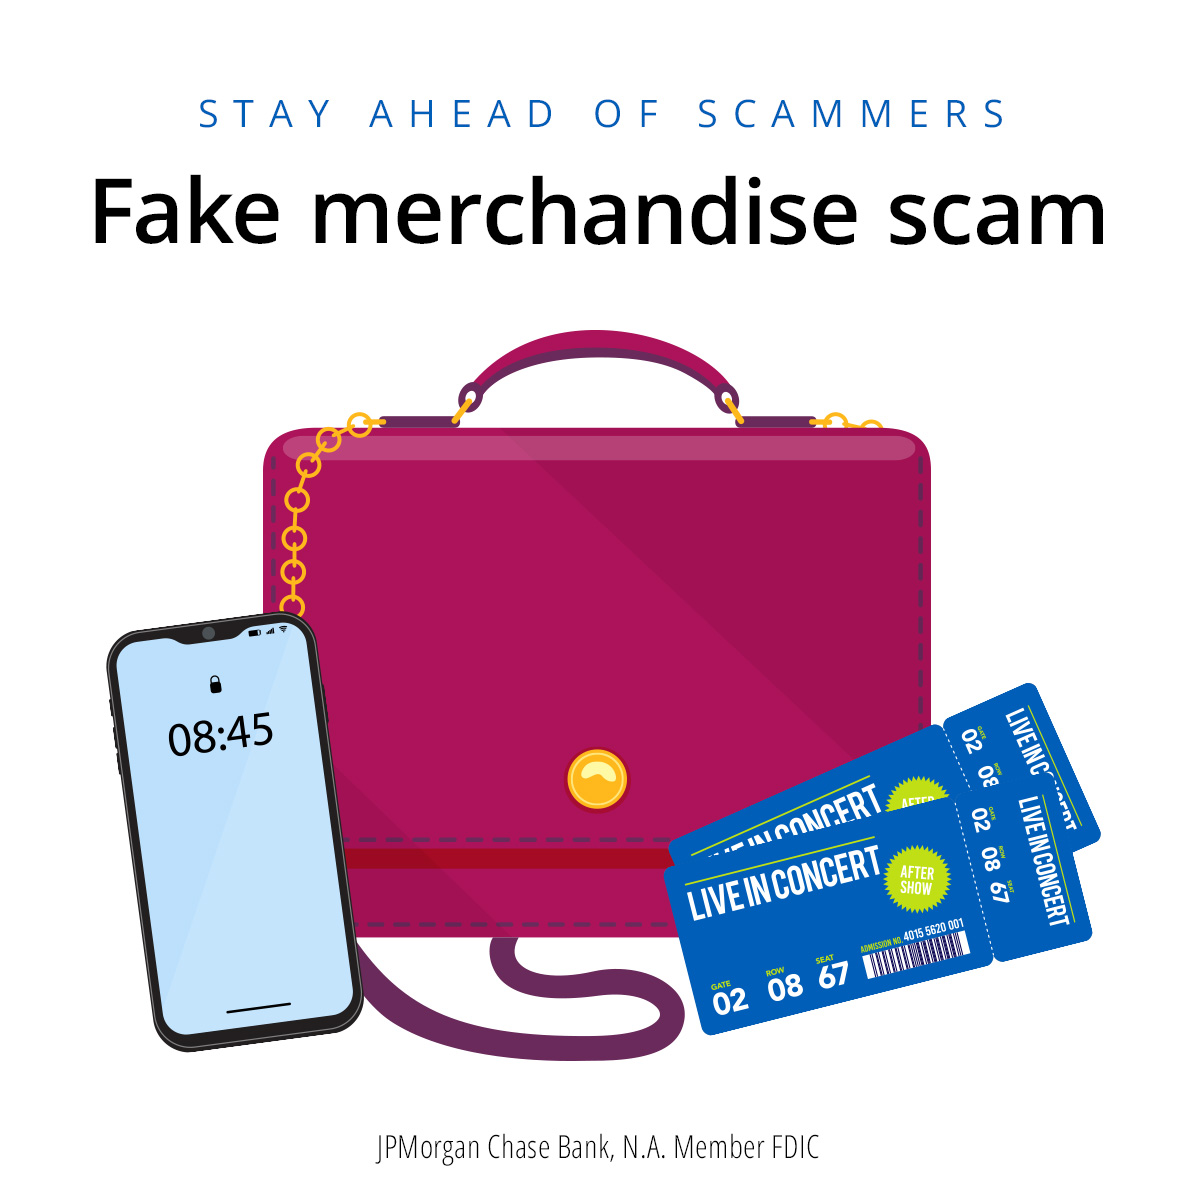 If a deal seems too good to be true, it may be a scam. Sellers may pressure buyers to pay with a bank wire or gift cards. The item may be fake or doesn’t arrive at all. Remember, if you pay with a debit or credit card you can dispute the transaction: chase.com/security-tips